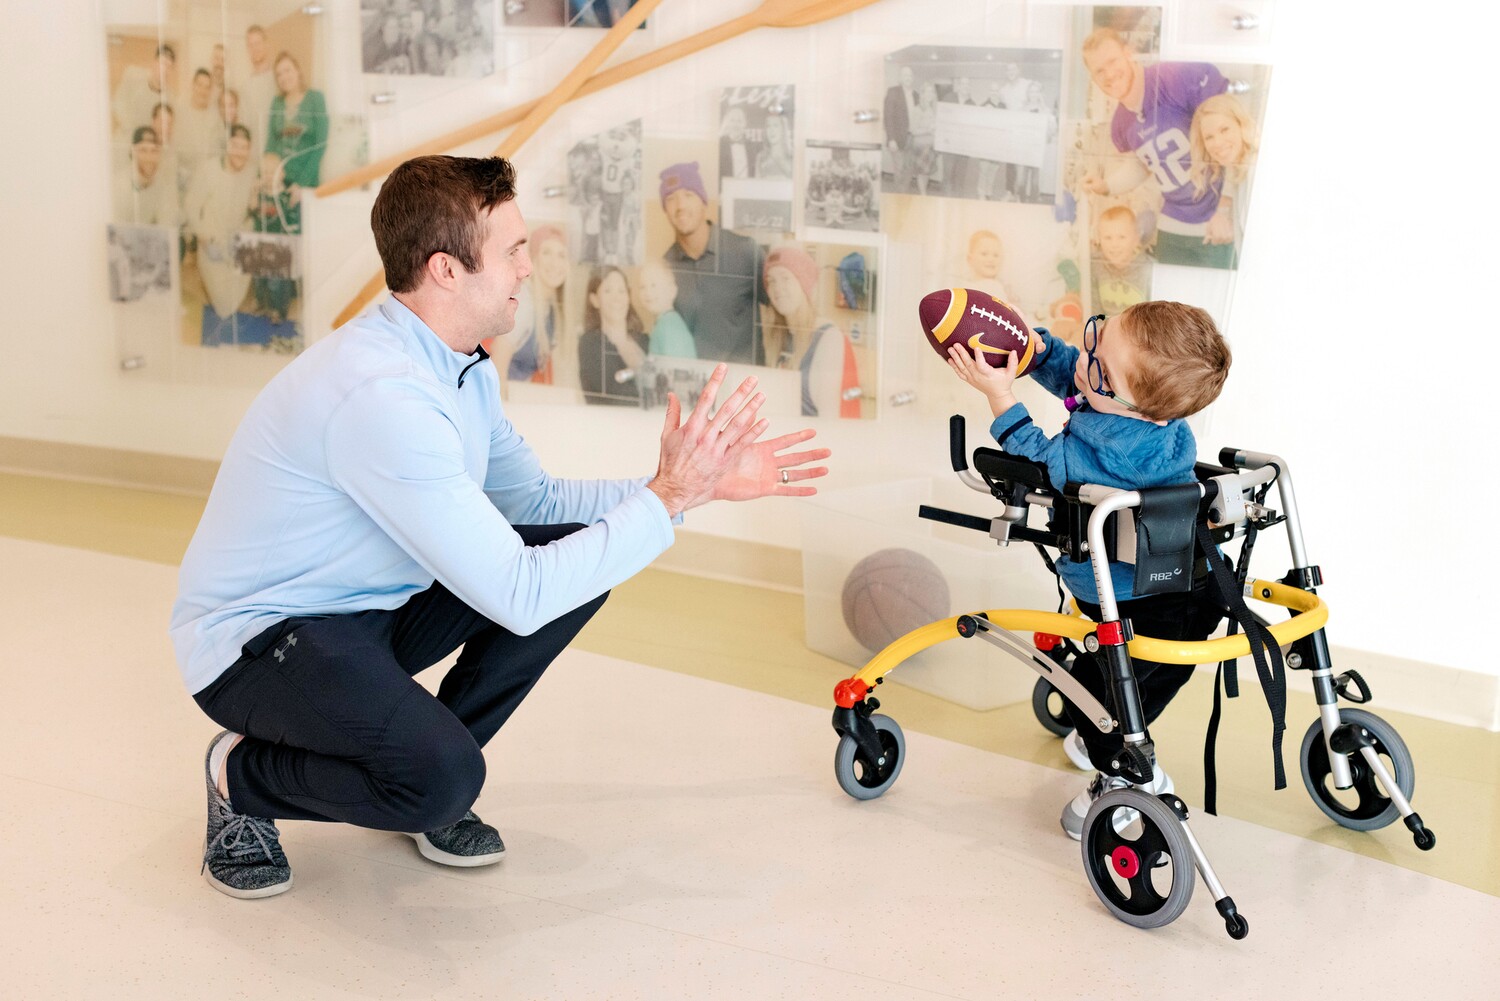 4-year-old Michael Borg, in a walker, passes a football to his dad, Brian Borg, squatting next to him